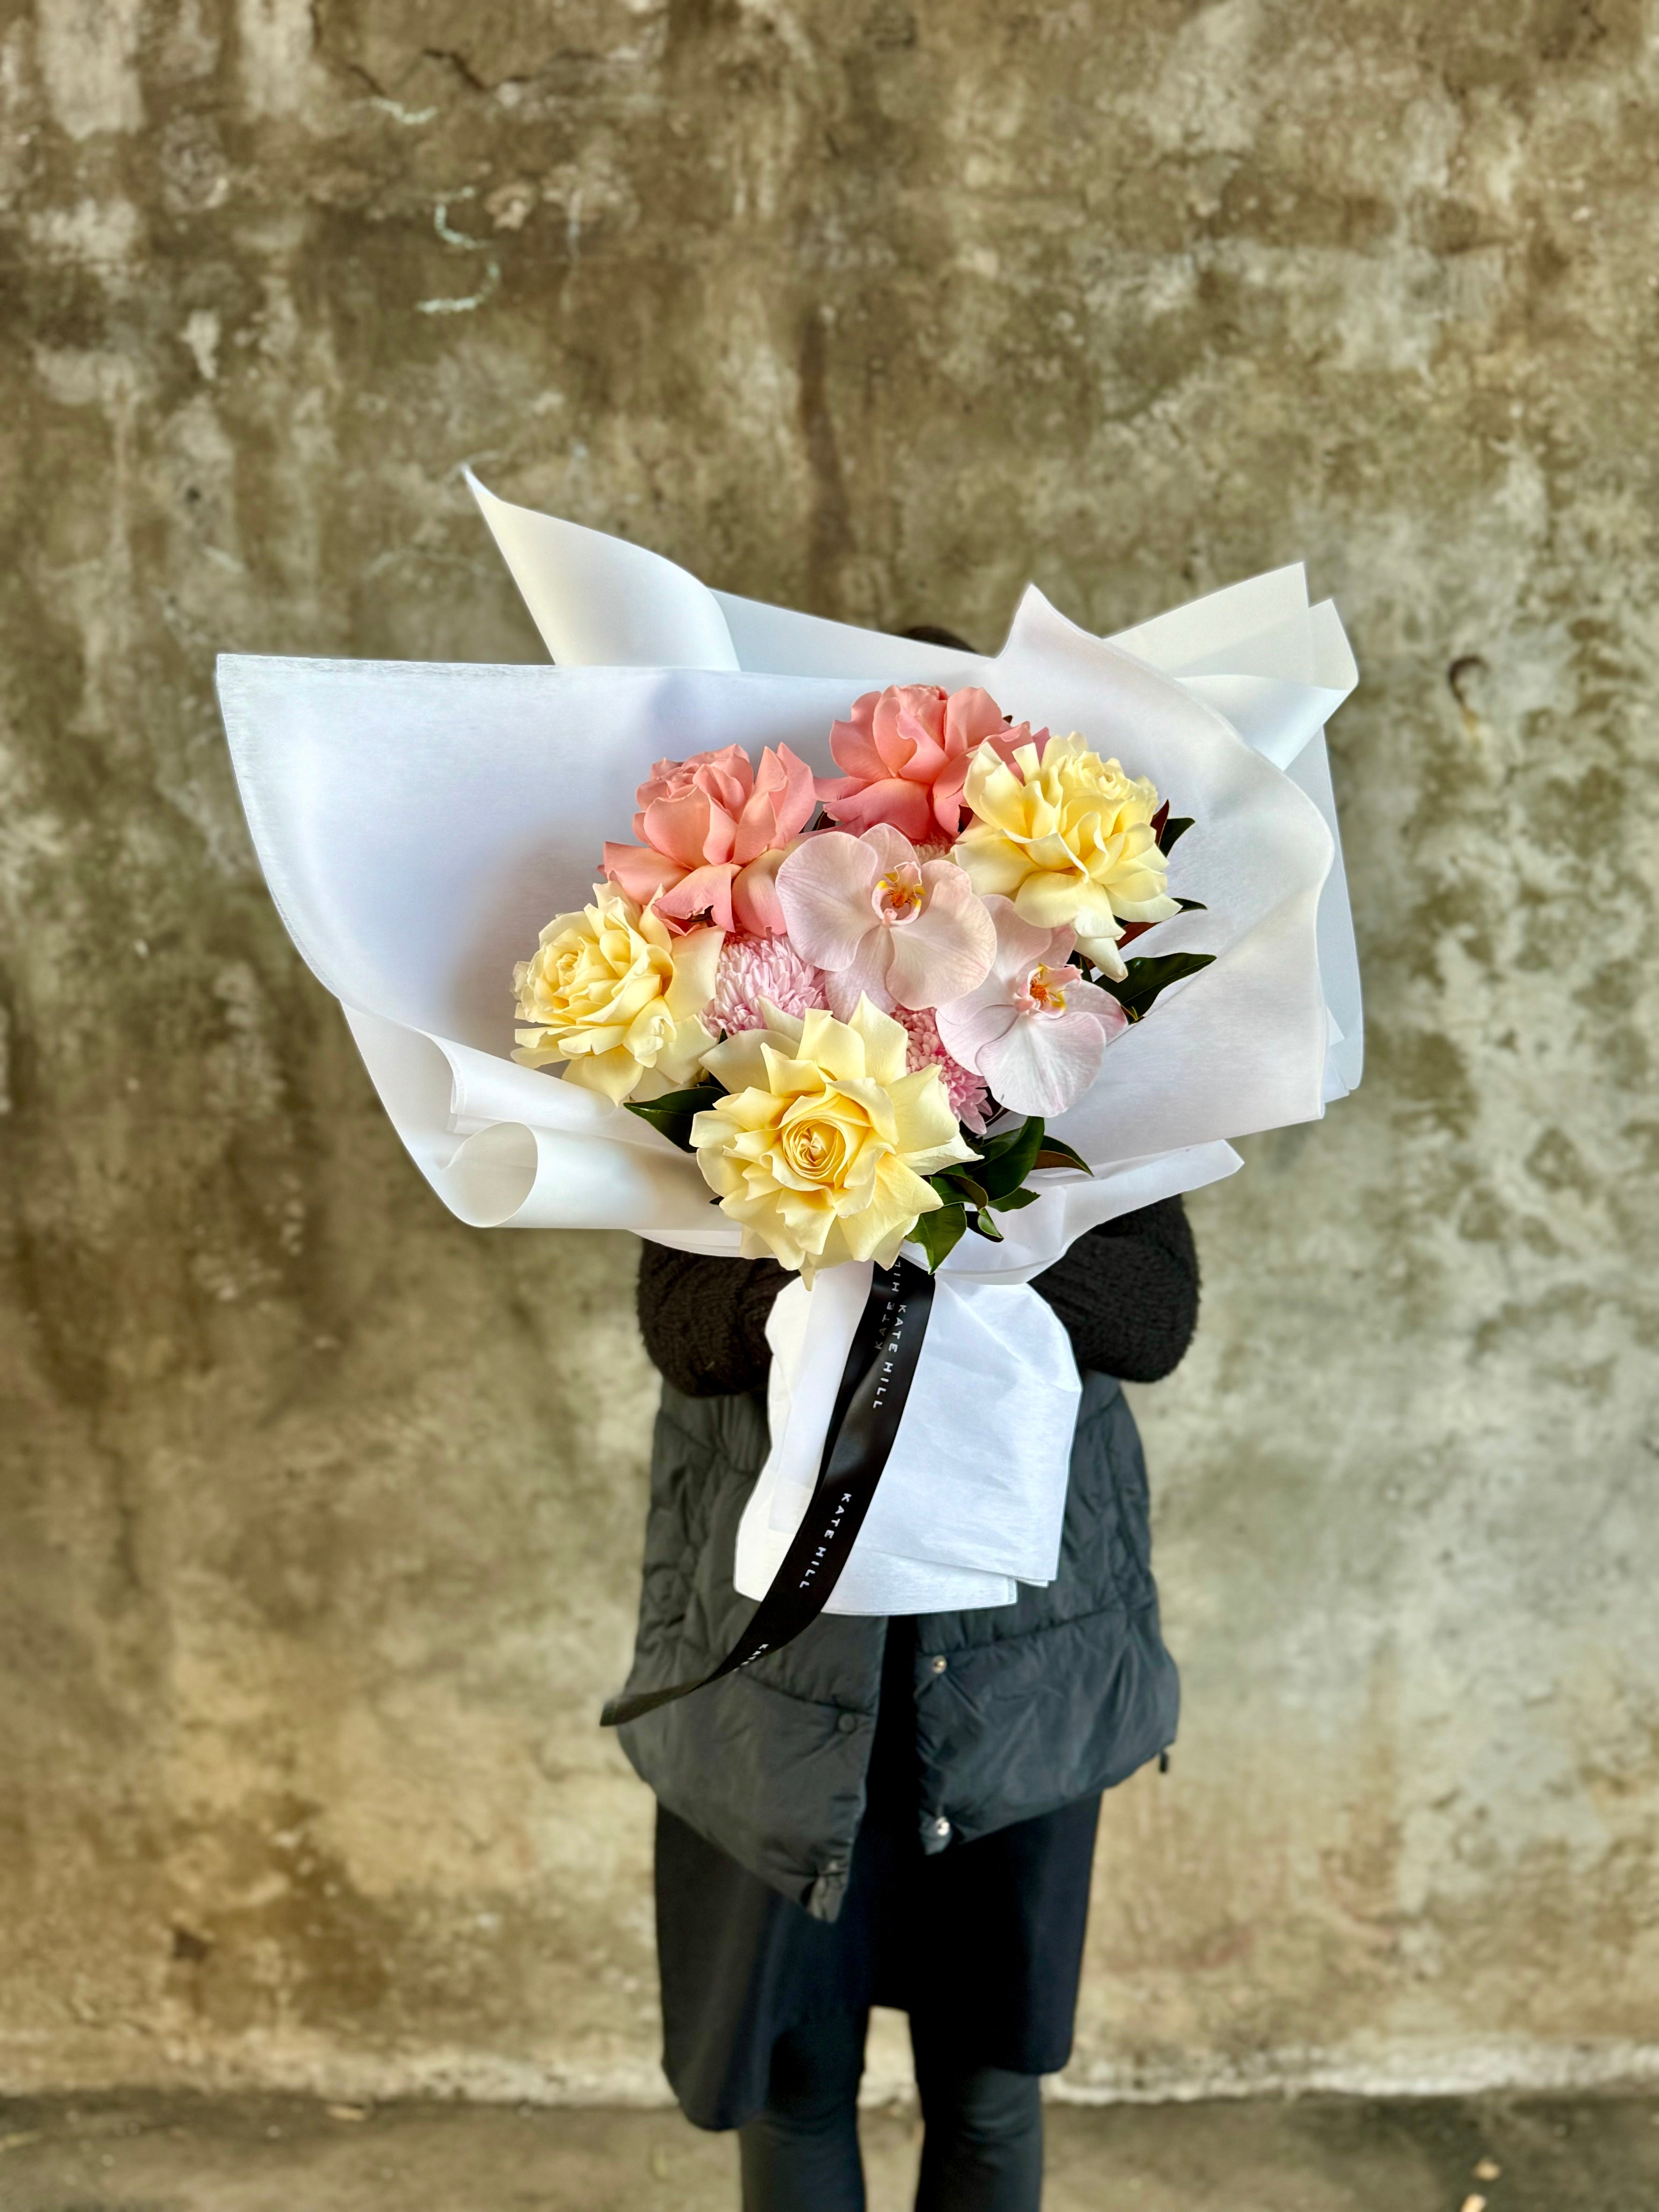 Florist wearing black clothing holding A medium sized lemon and blush guft bouquet in kate hill flower bag, sitting on a black bentwood chair in front of a concrete wall.